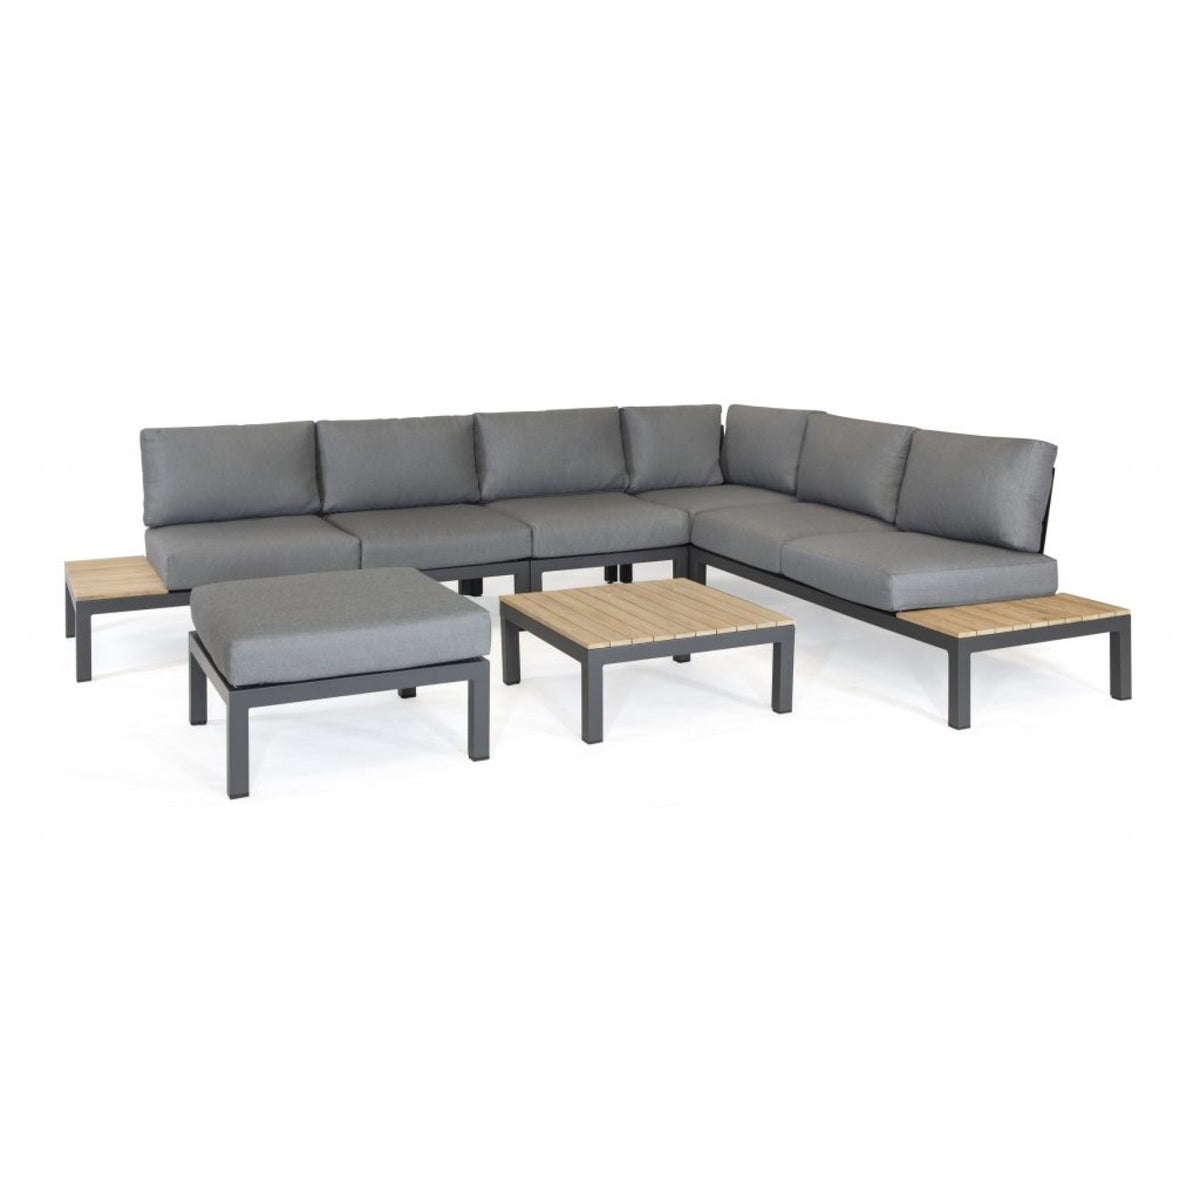 Kettler Elba Signature Low Lounge Corner Sofa Set with Side Chair Footstool &amp; Coffee Table